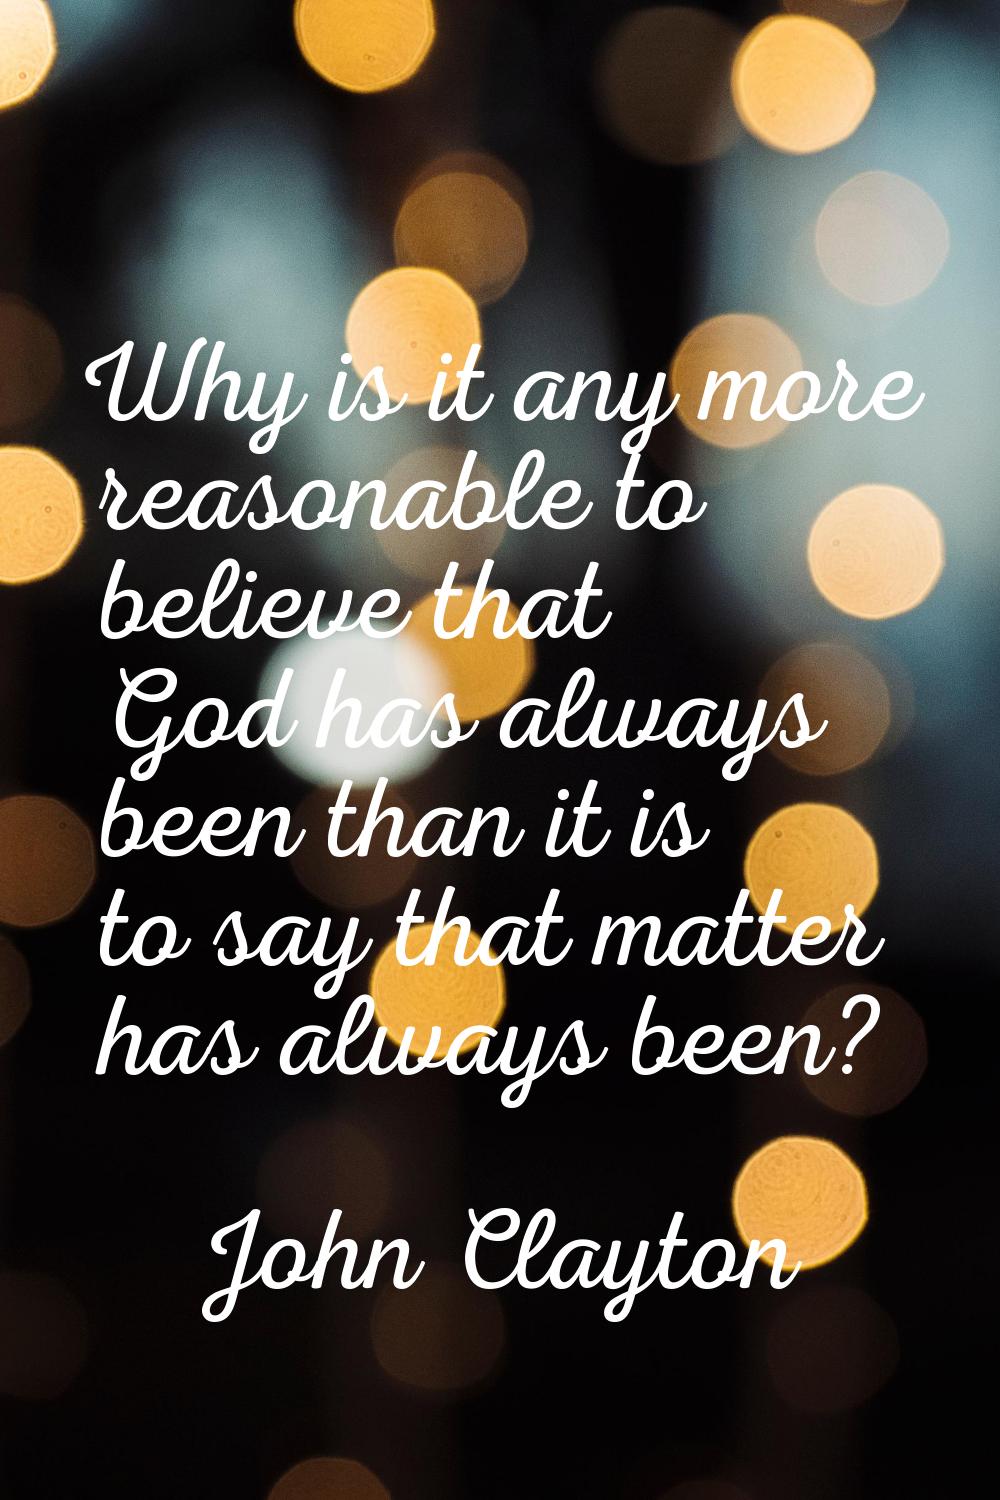 Why is it any more reasonable to believe that God has always been than it is to say that matter has